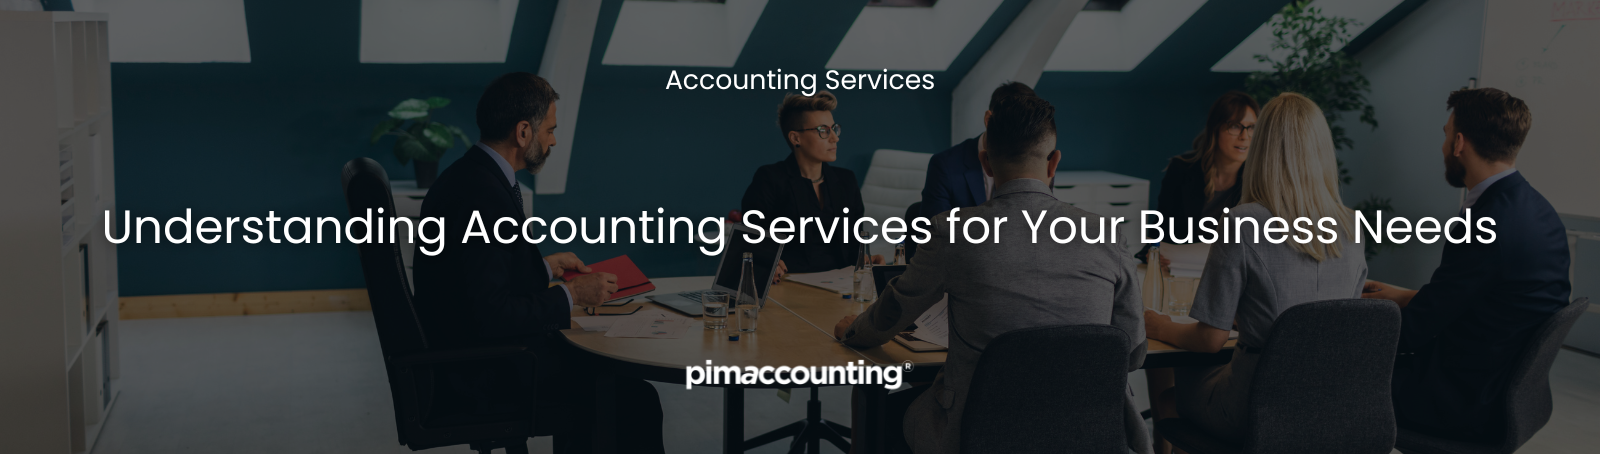 Understanding Accounting Services for Your Business Needs